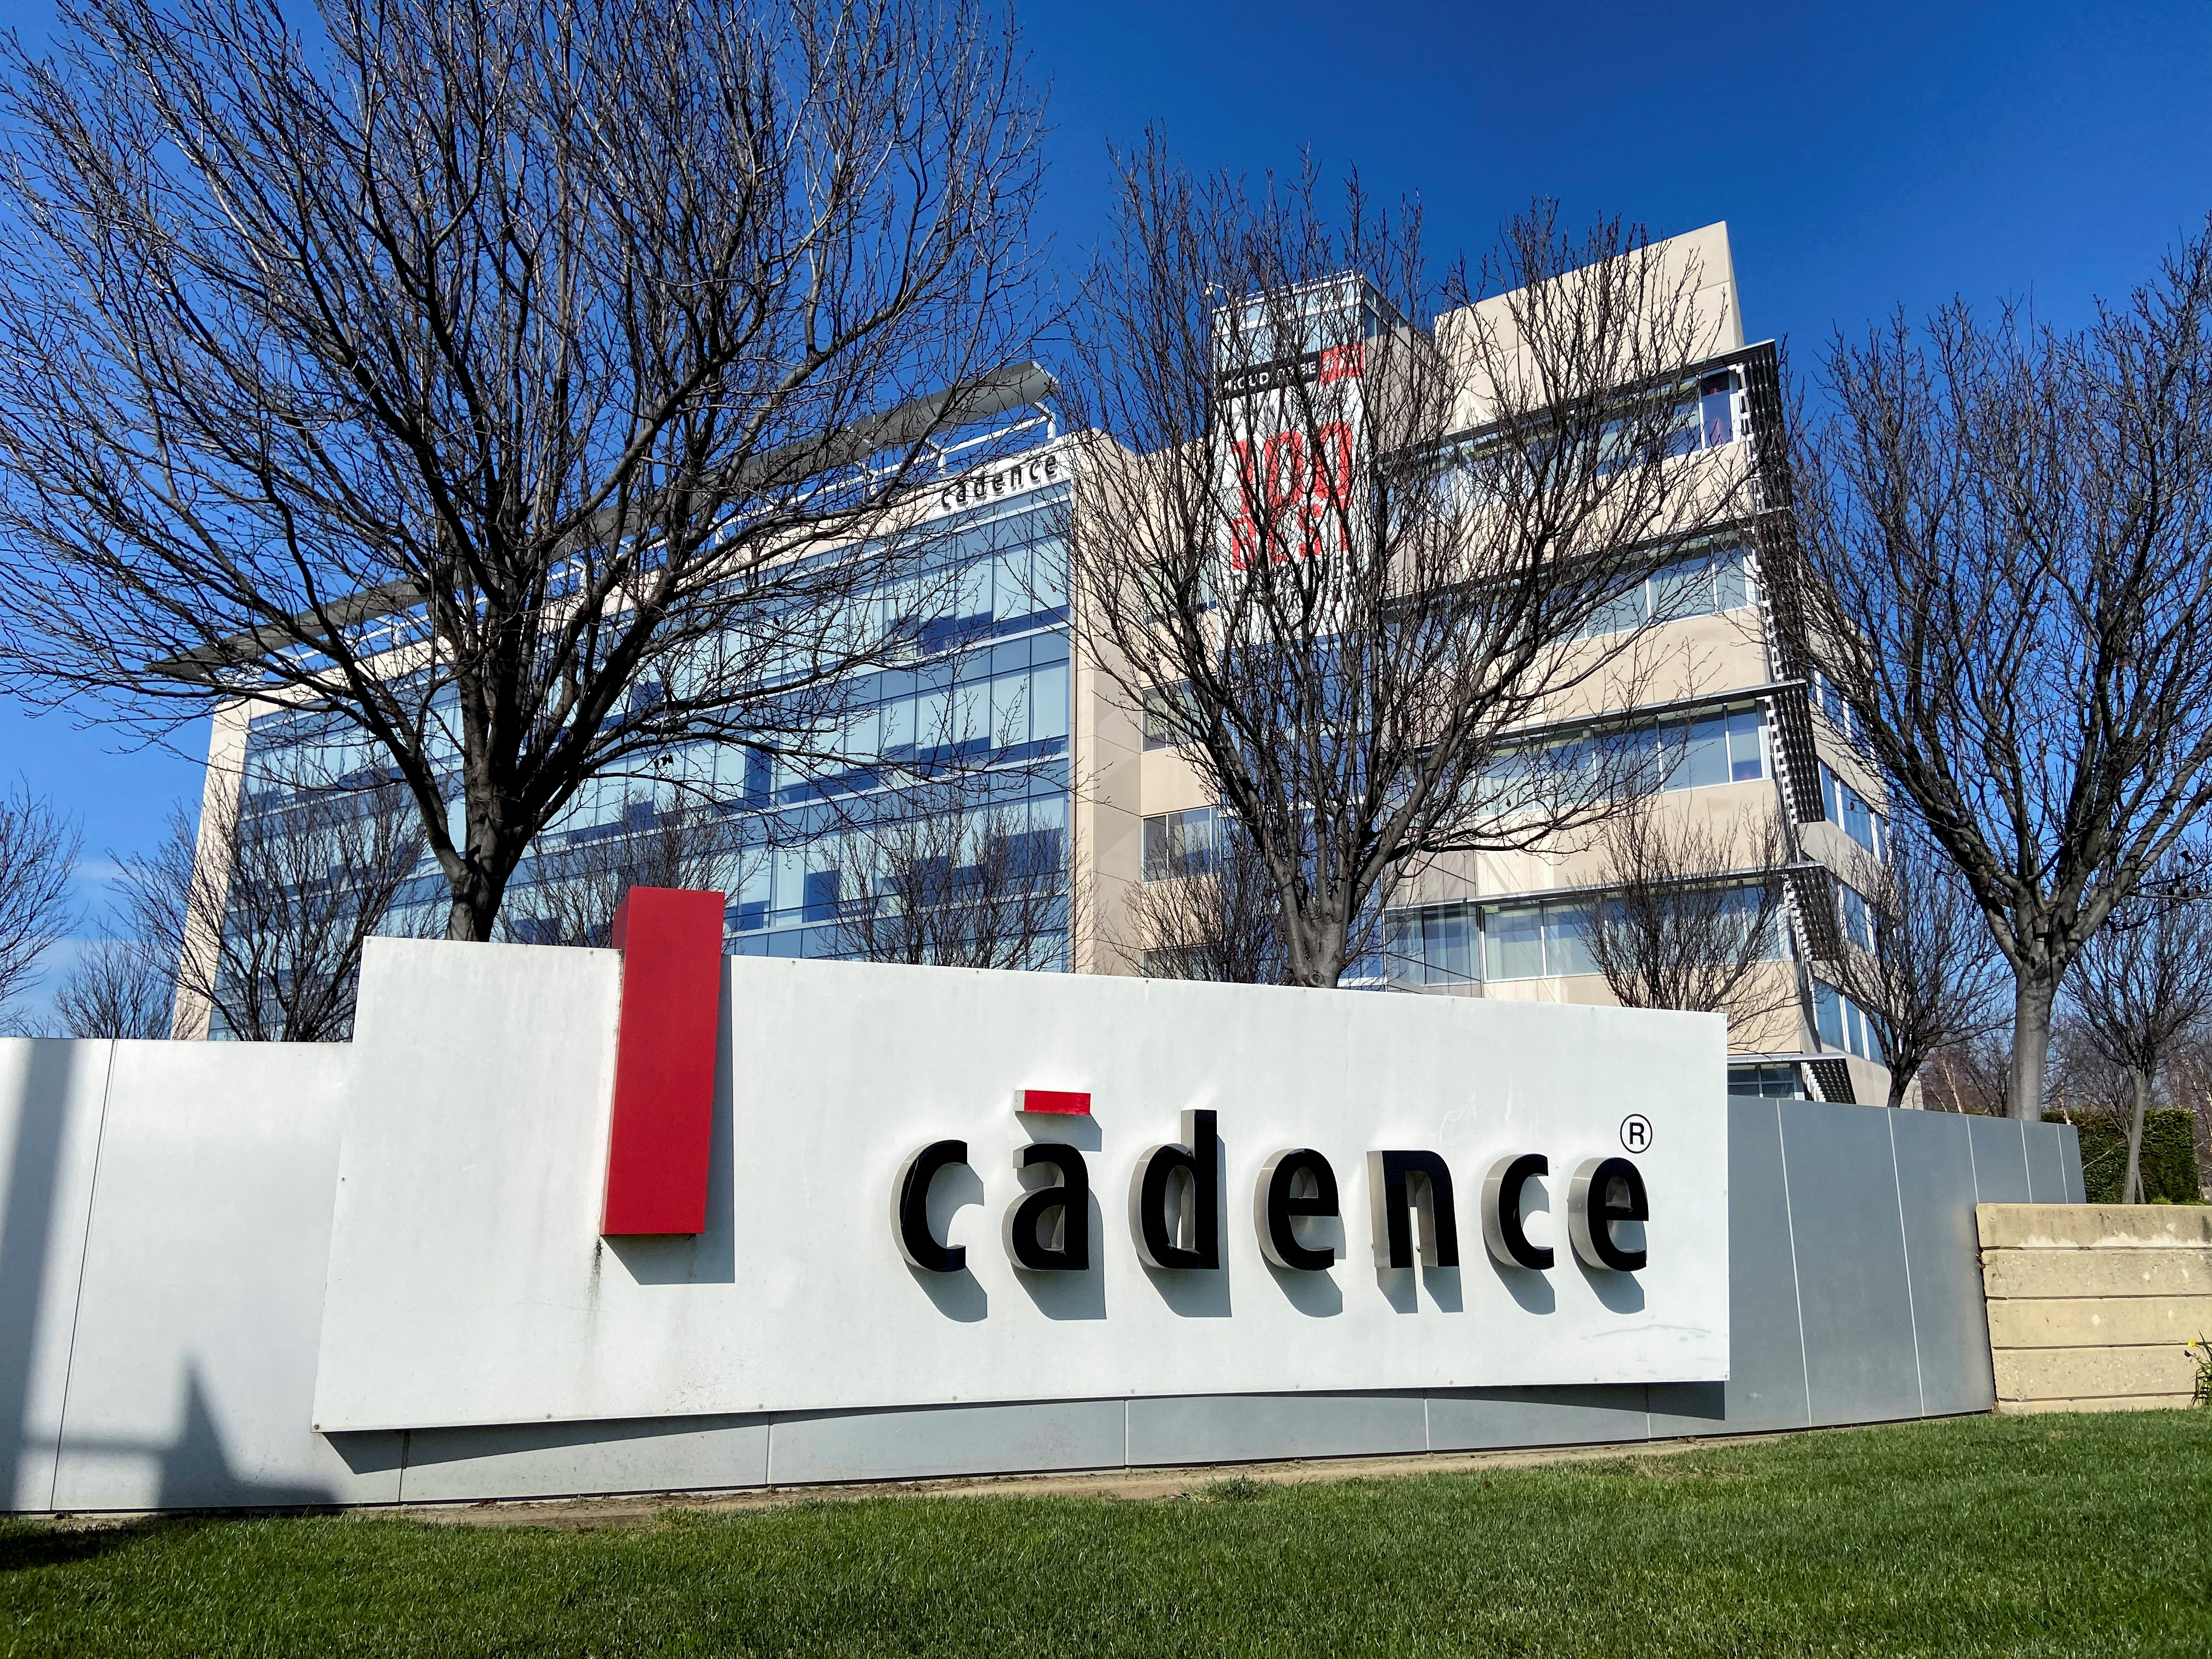 Cadence Design Systems logo is pictured in San Jose